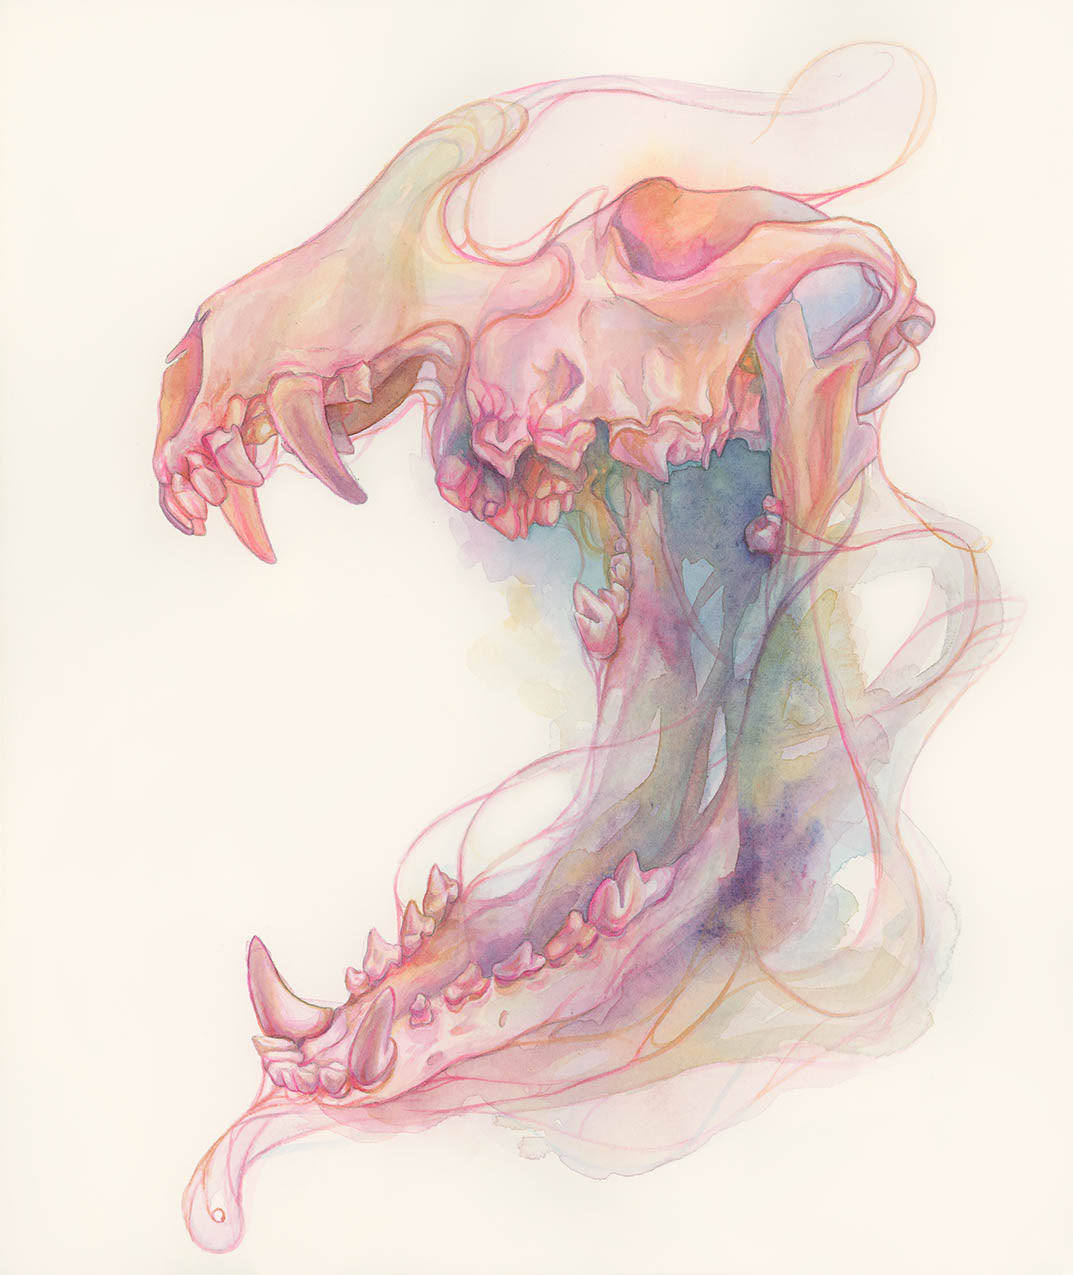 These Teeth That Gnash - 11x14 Watercolor Skull Art Open Edition Print